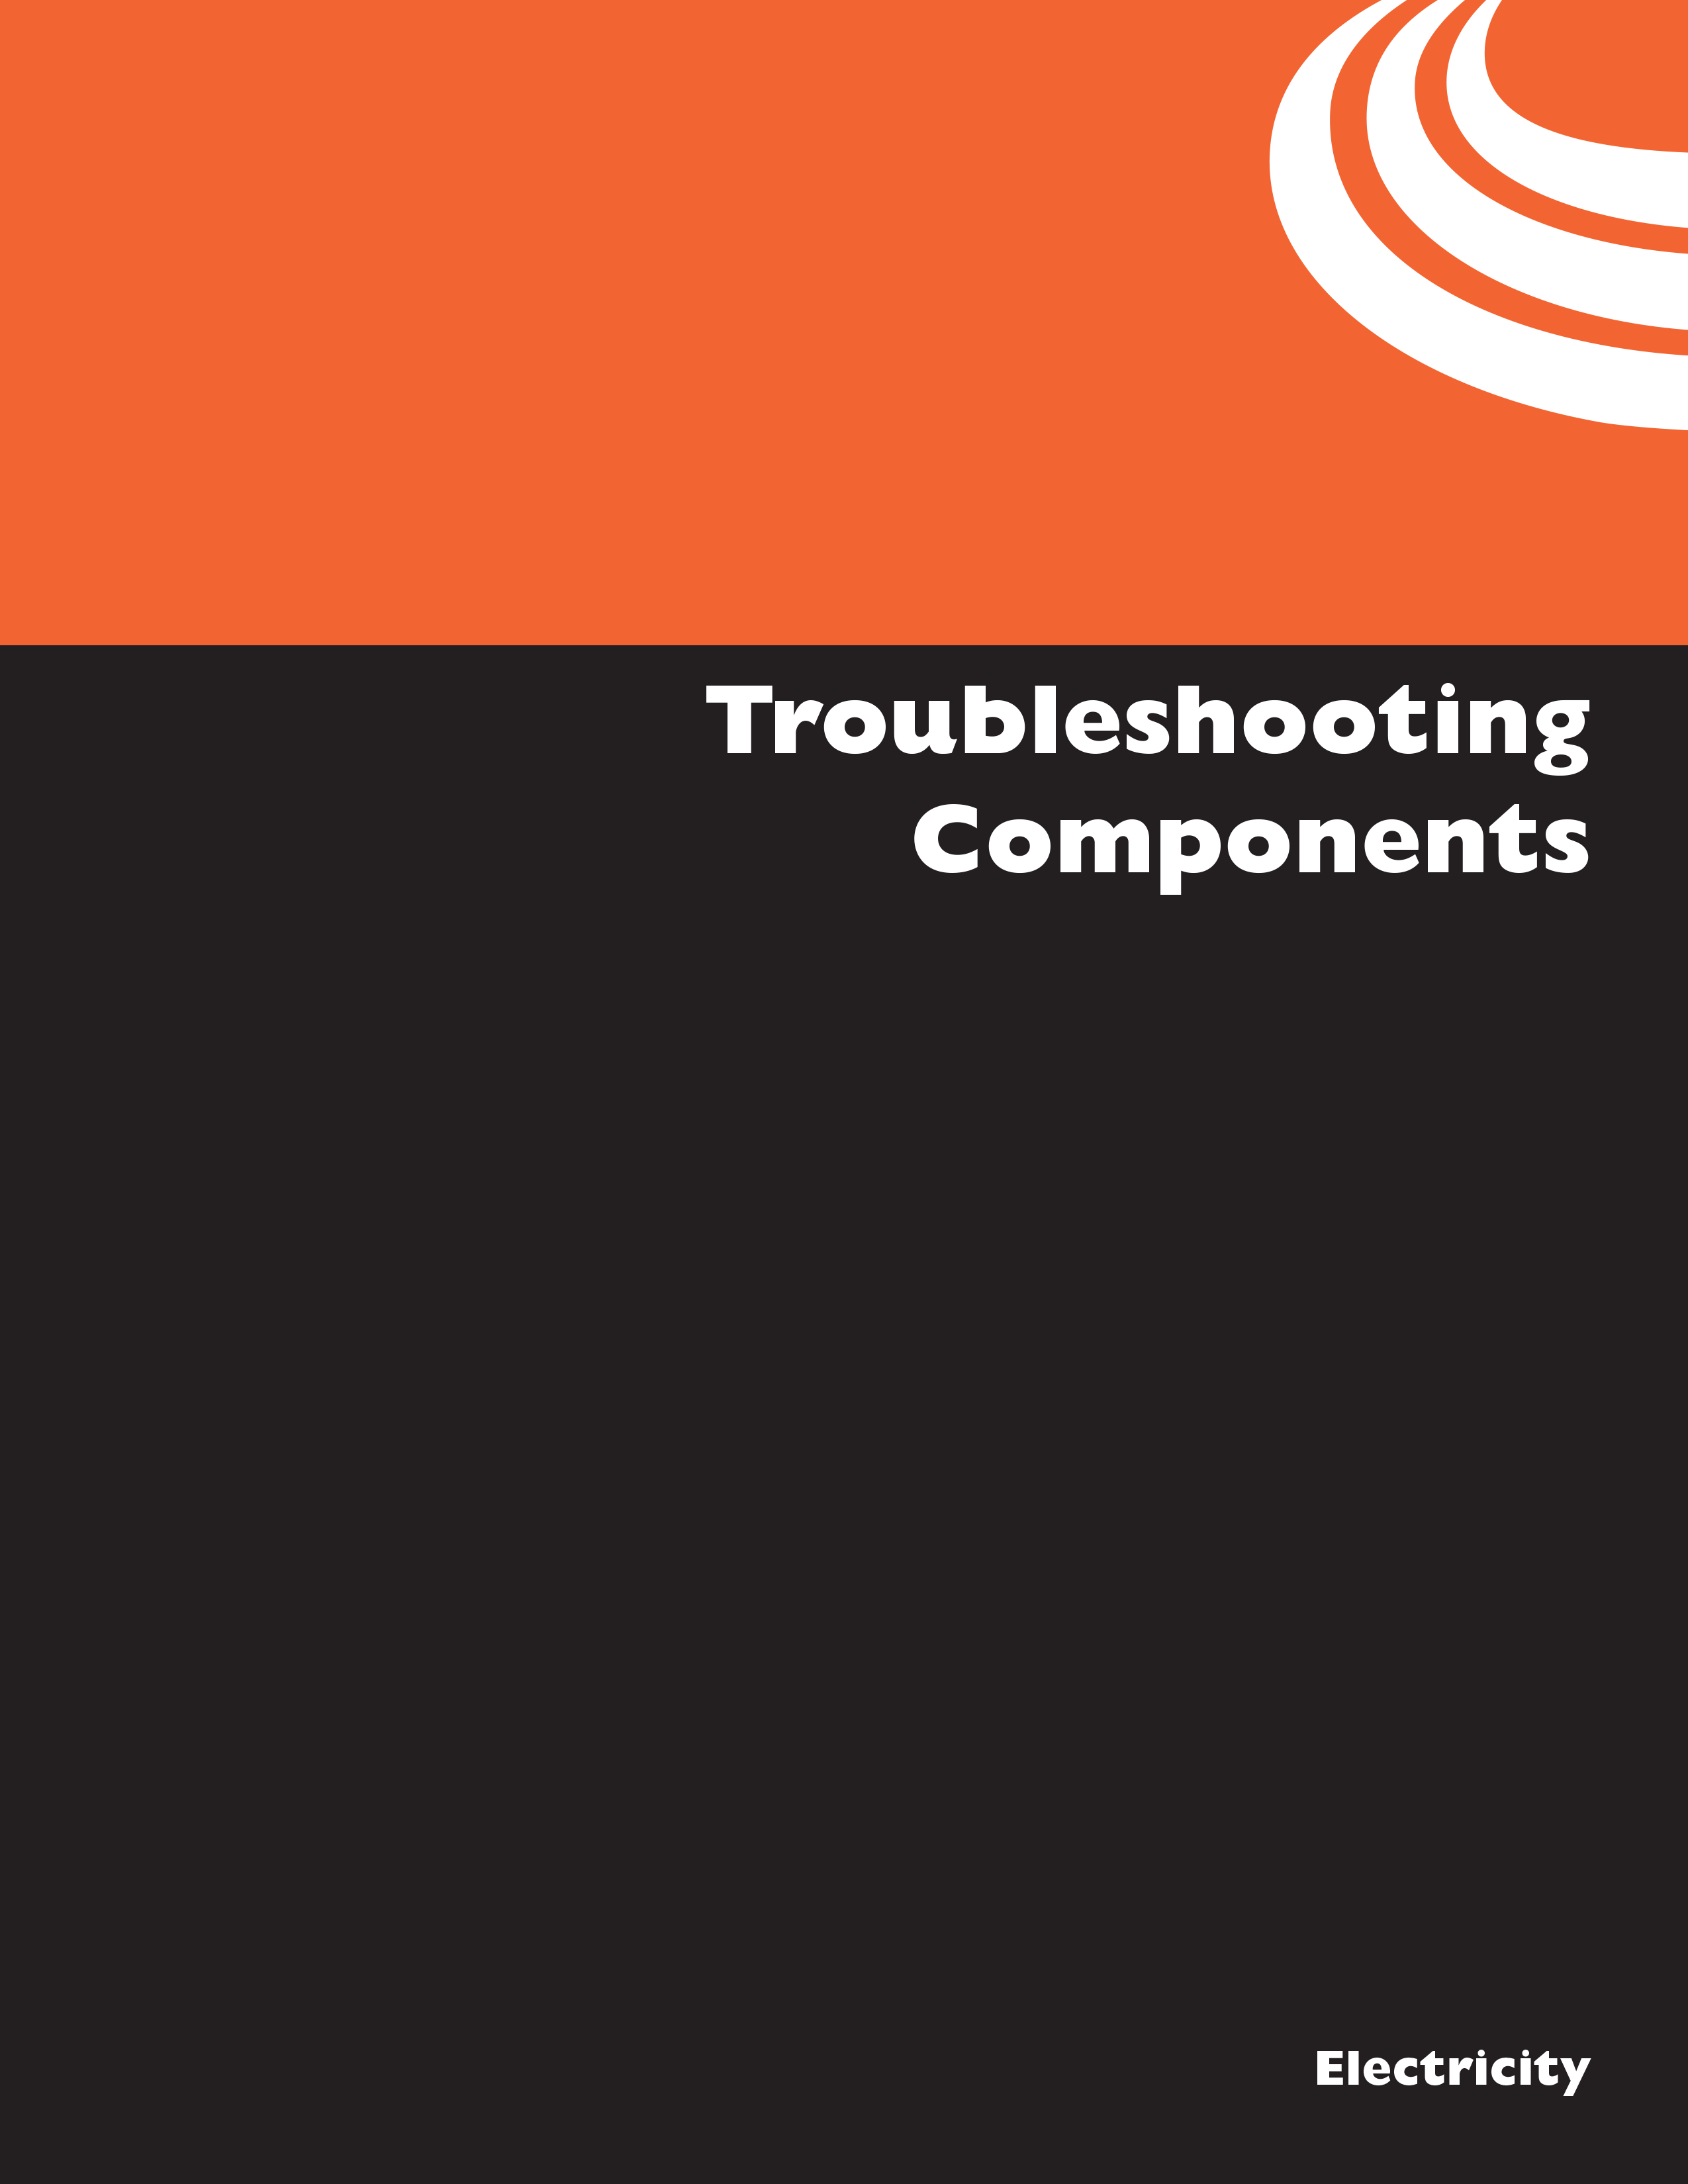 Troubleshooting Components